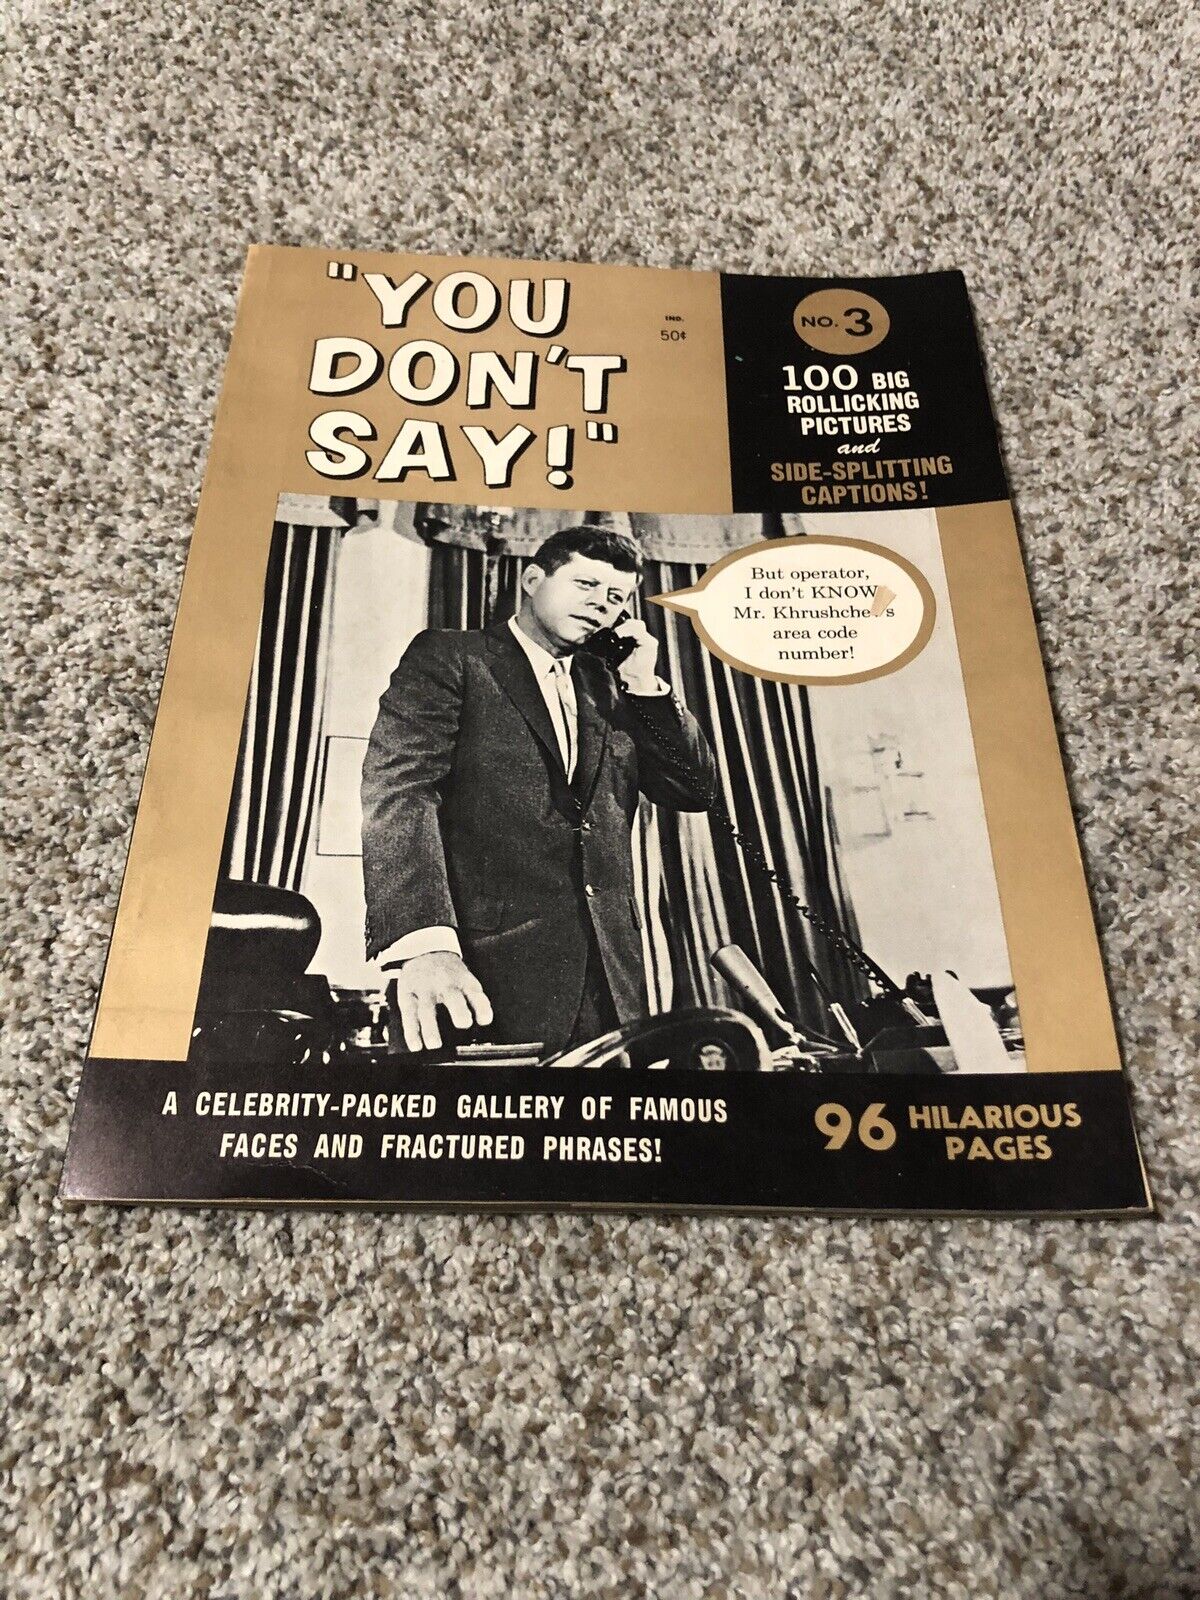 John F Kennedy “You Don’t Say” magazine 100 big rollicking pictures. Rare